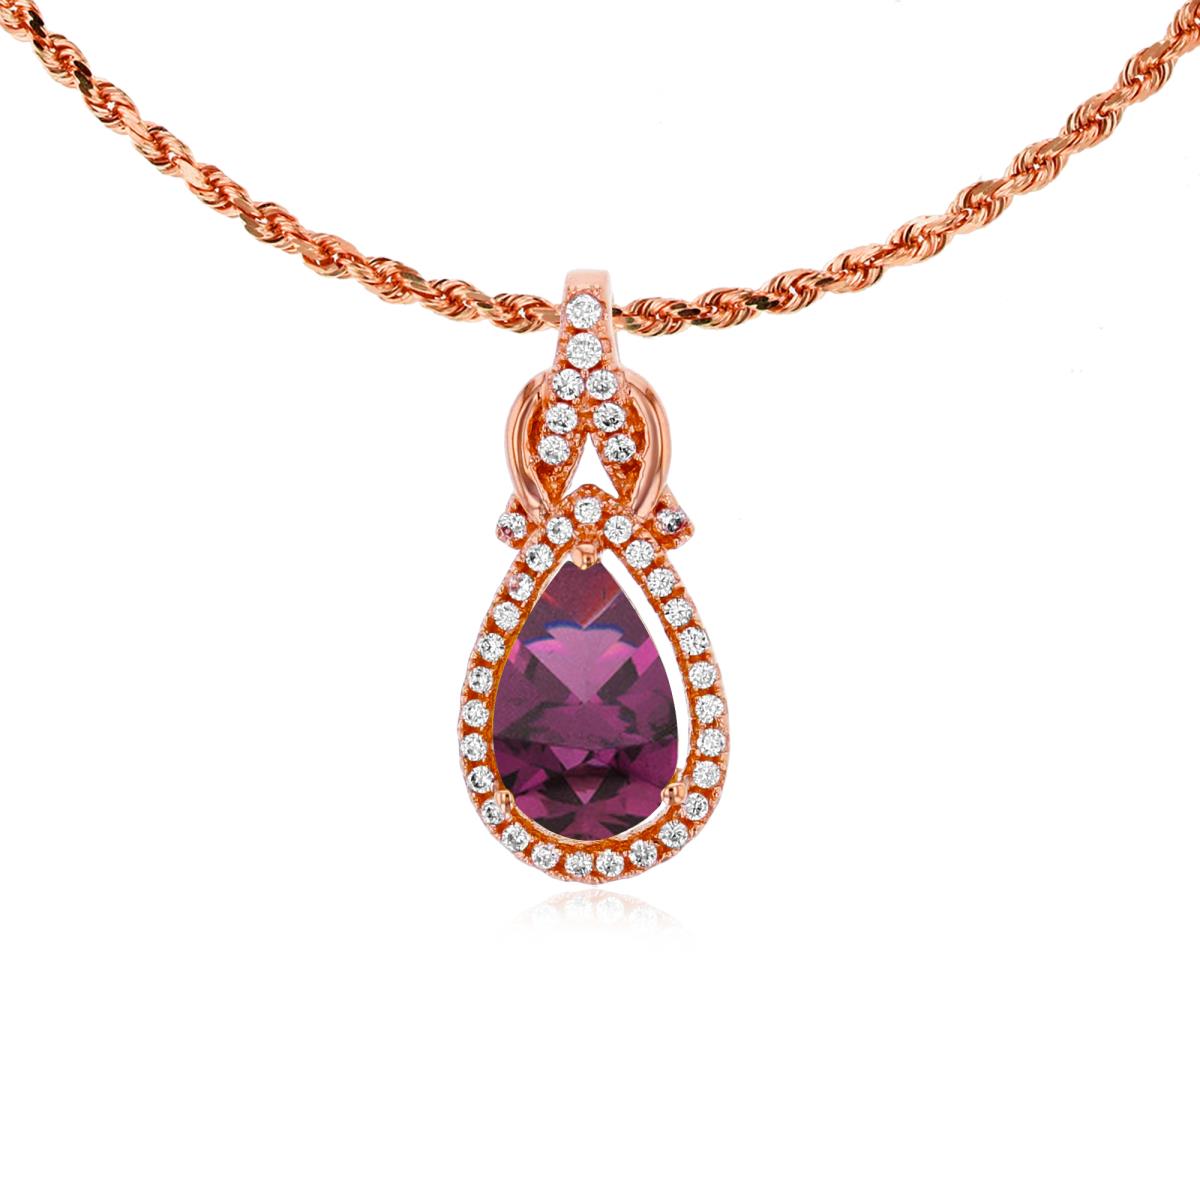 10K Rose Gold 8x5mm Pear Cut Rhodolite & 0.11 CTTW Rnd Diamond Knot 18" Rope Chain Necklace